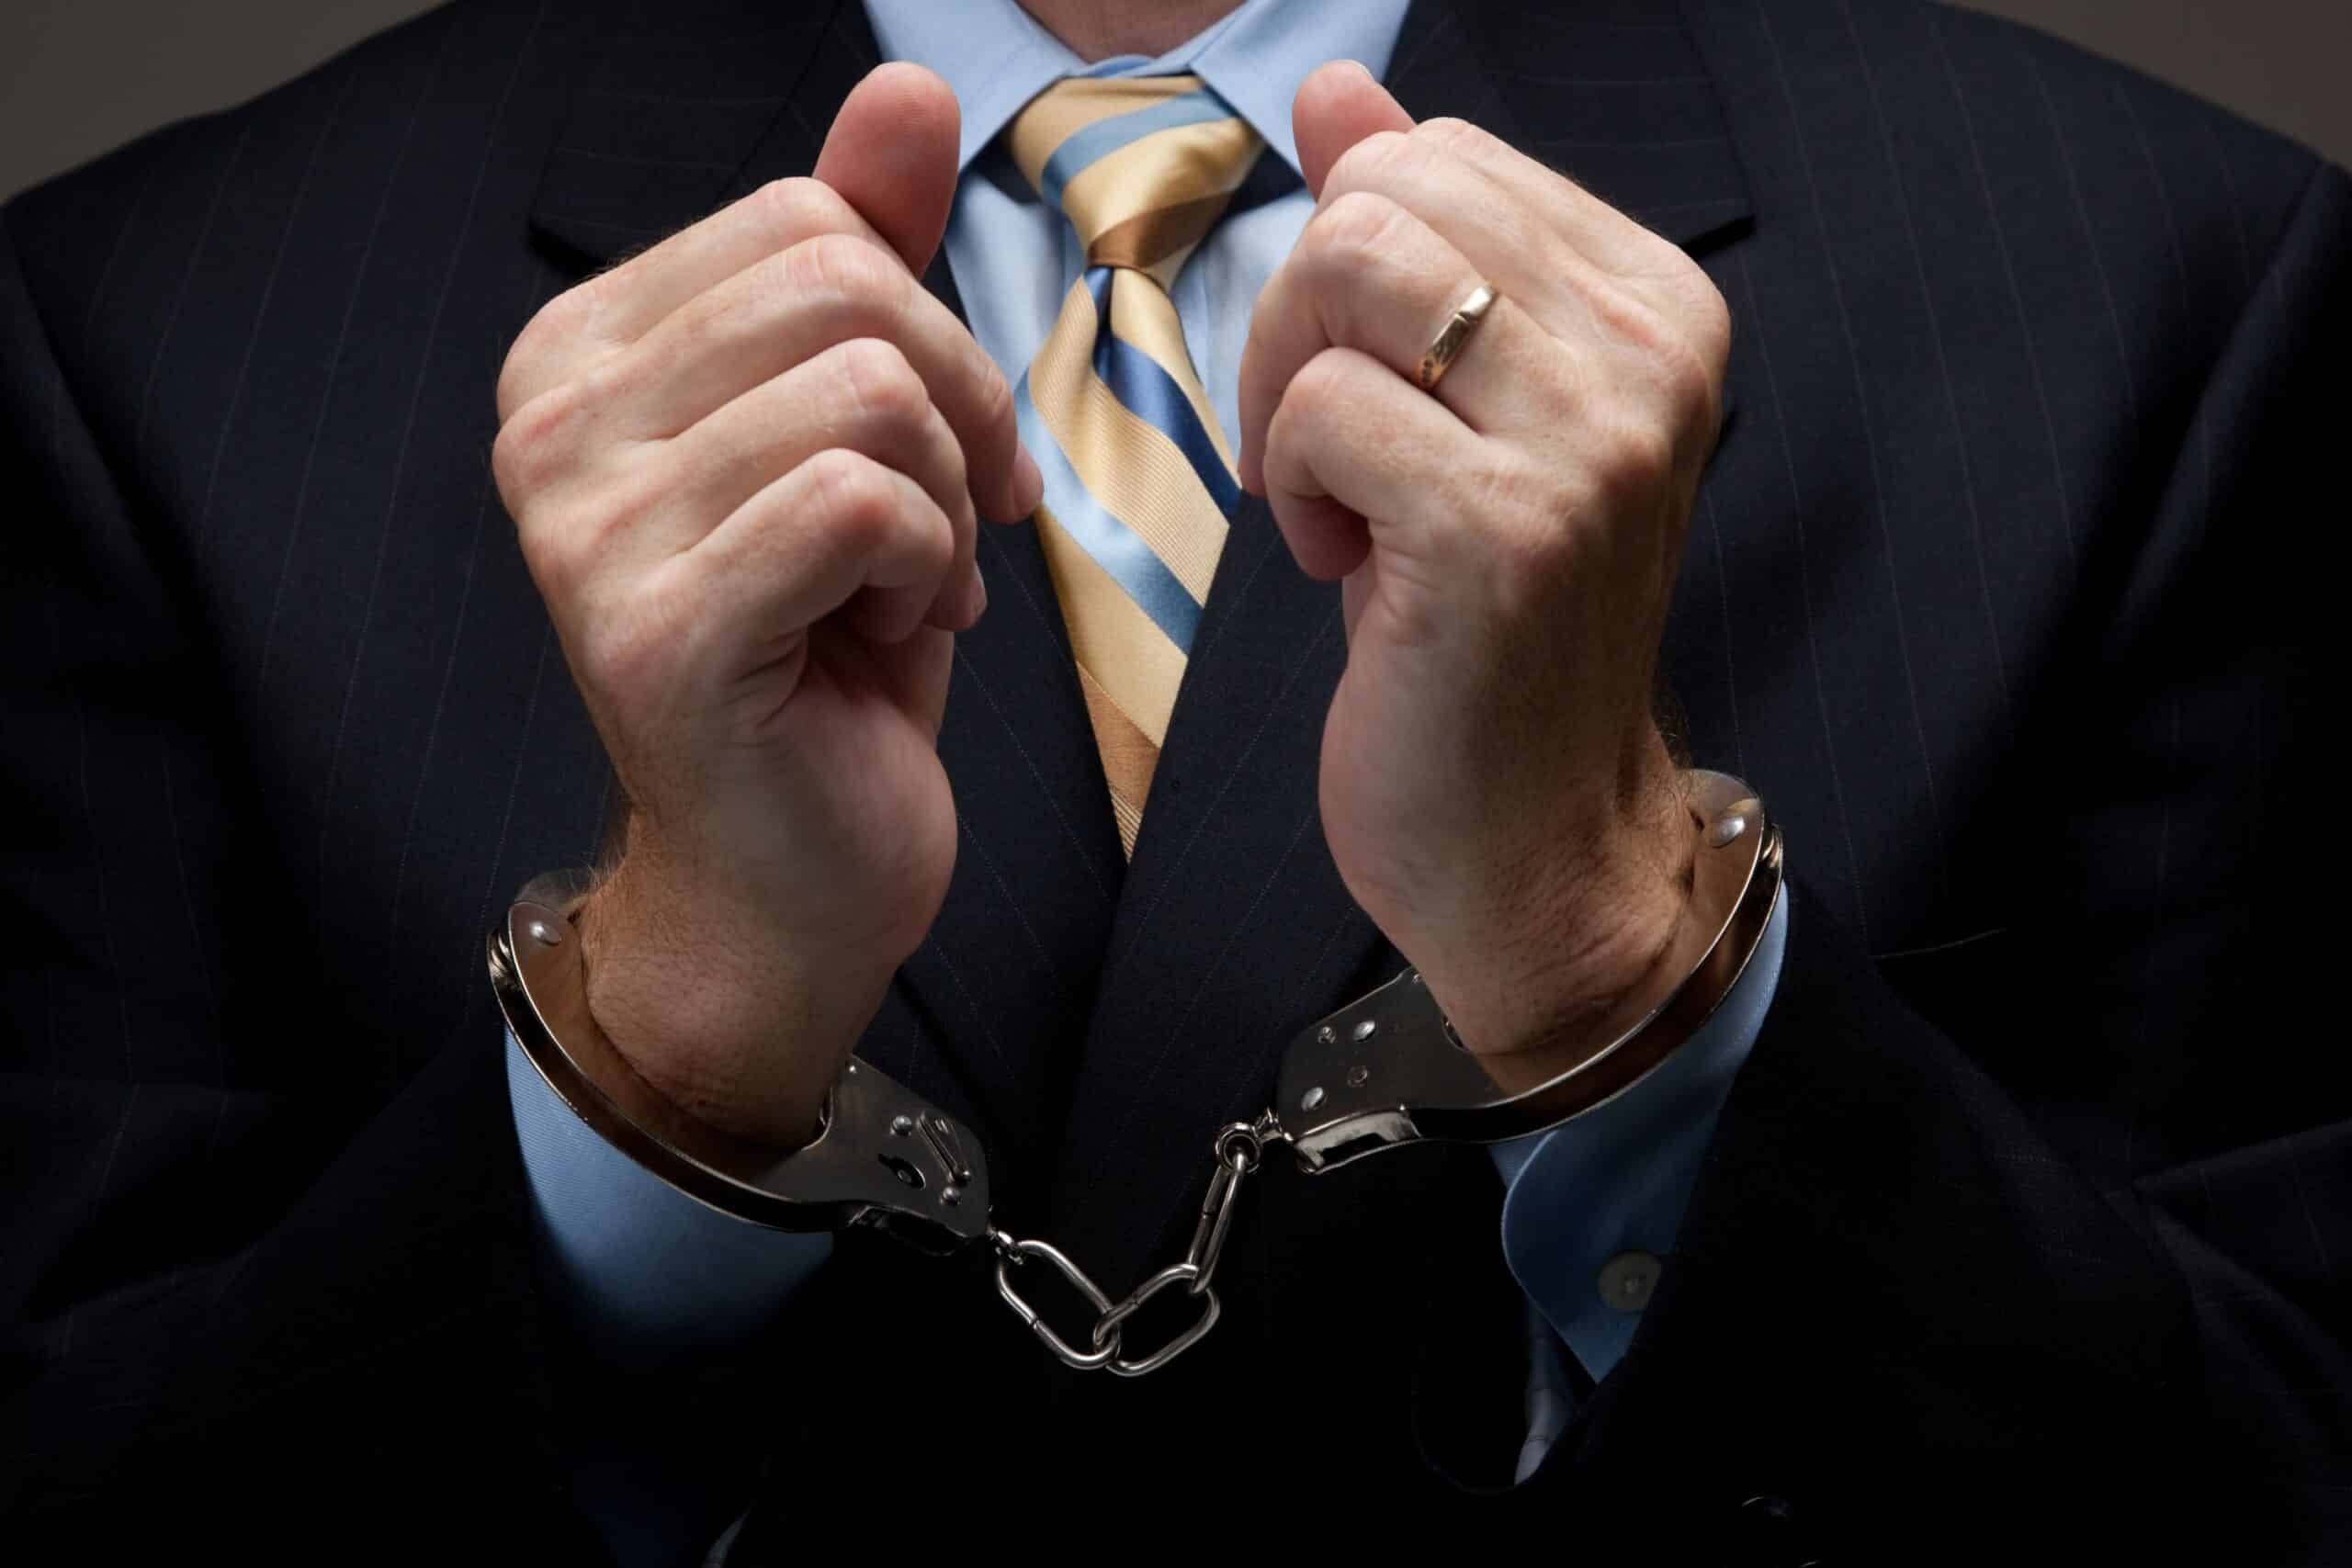 TX White Collar Crimes: Different Offenses and Defending Your Rights